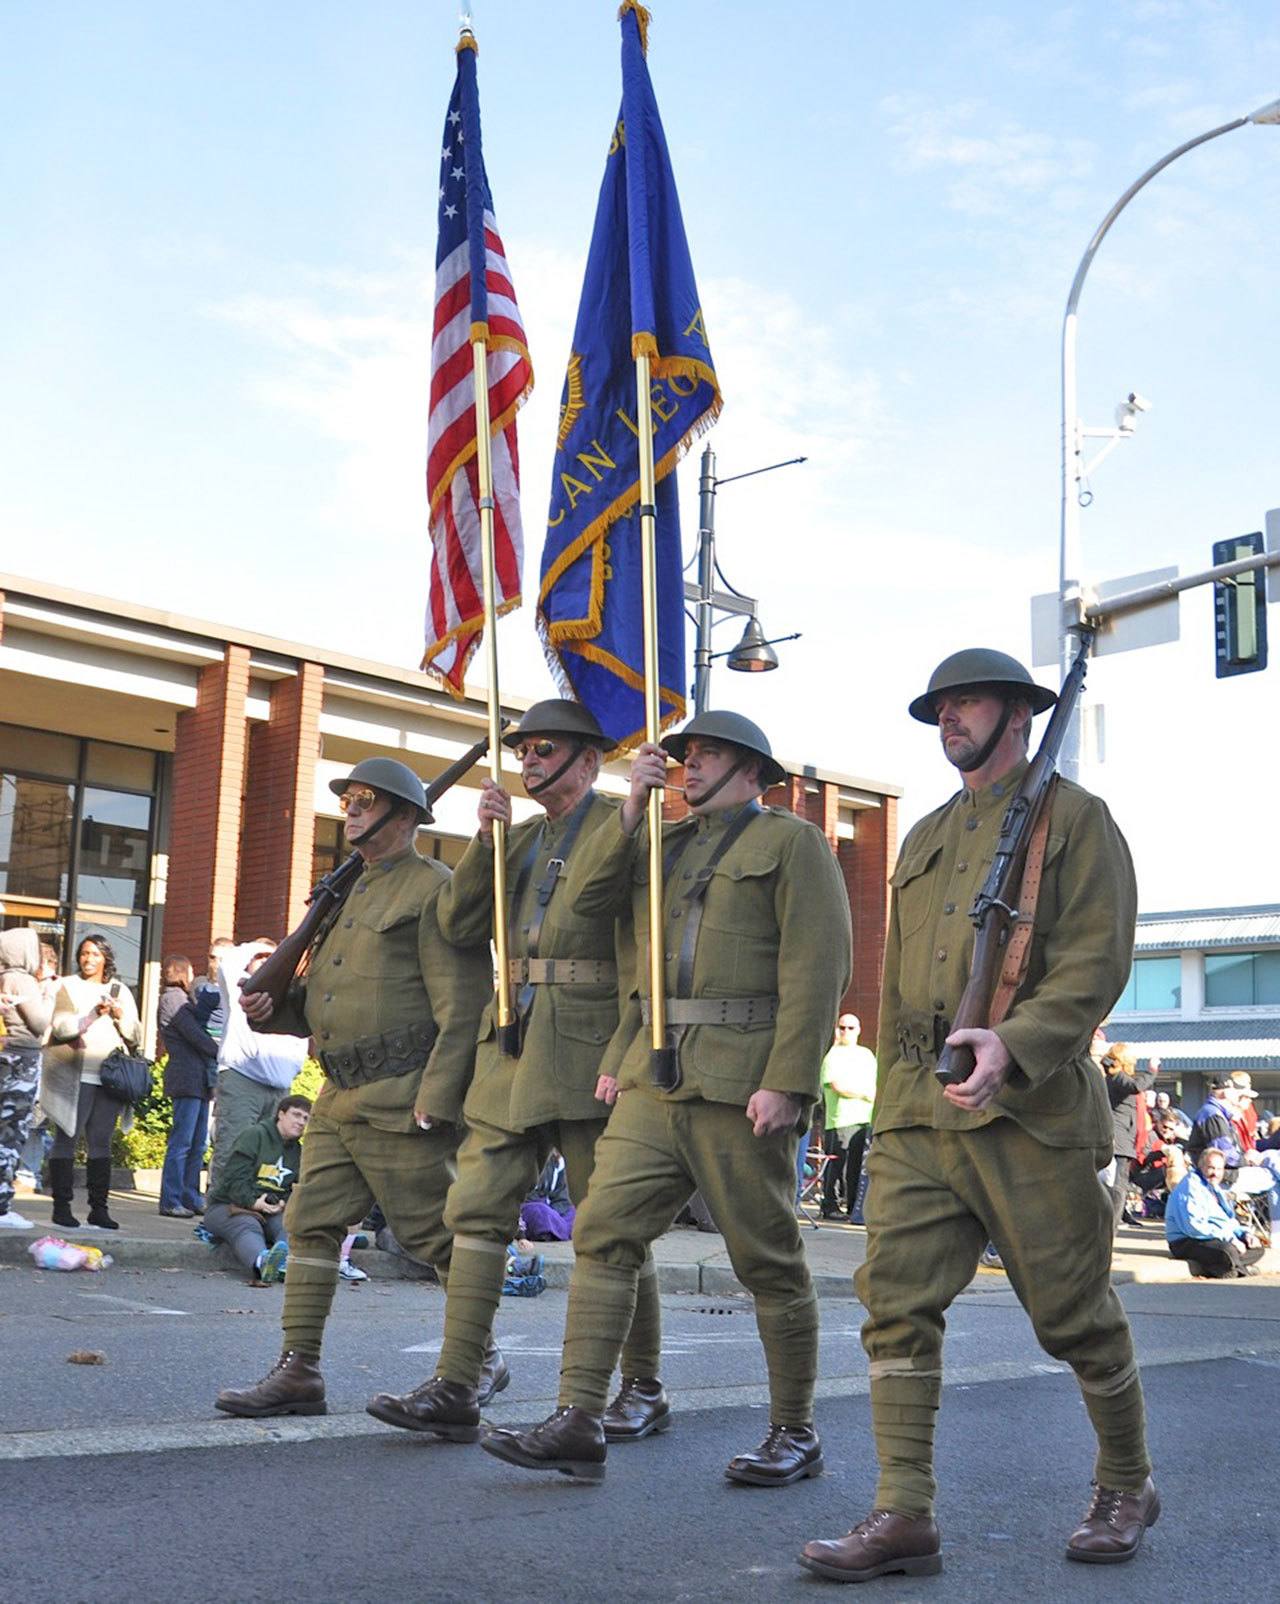 Flags, families and tens of thousands of spectators will line Main Street in Auburn for the 51st annual Veterans Parade at 11 a.m. on Saturday. The parade features more than 200 entries and nearly 6,000 parade participants showcasing American strength of will, endurance and purpose. RACHEL CIAMPI, Auburn Reporter